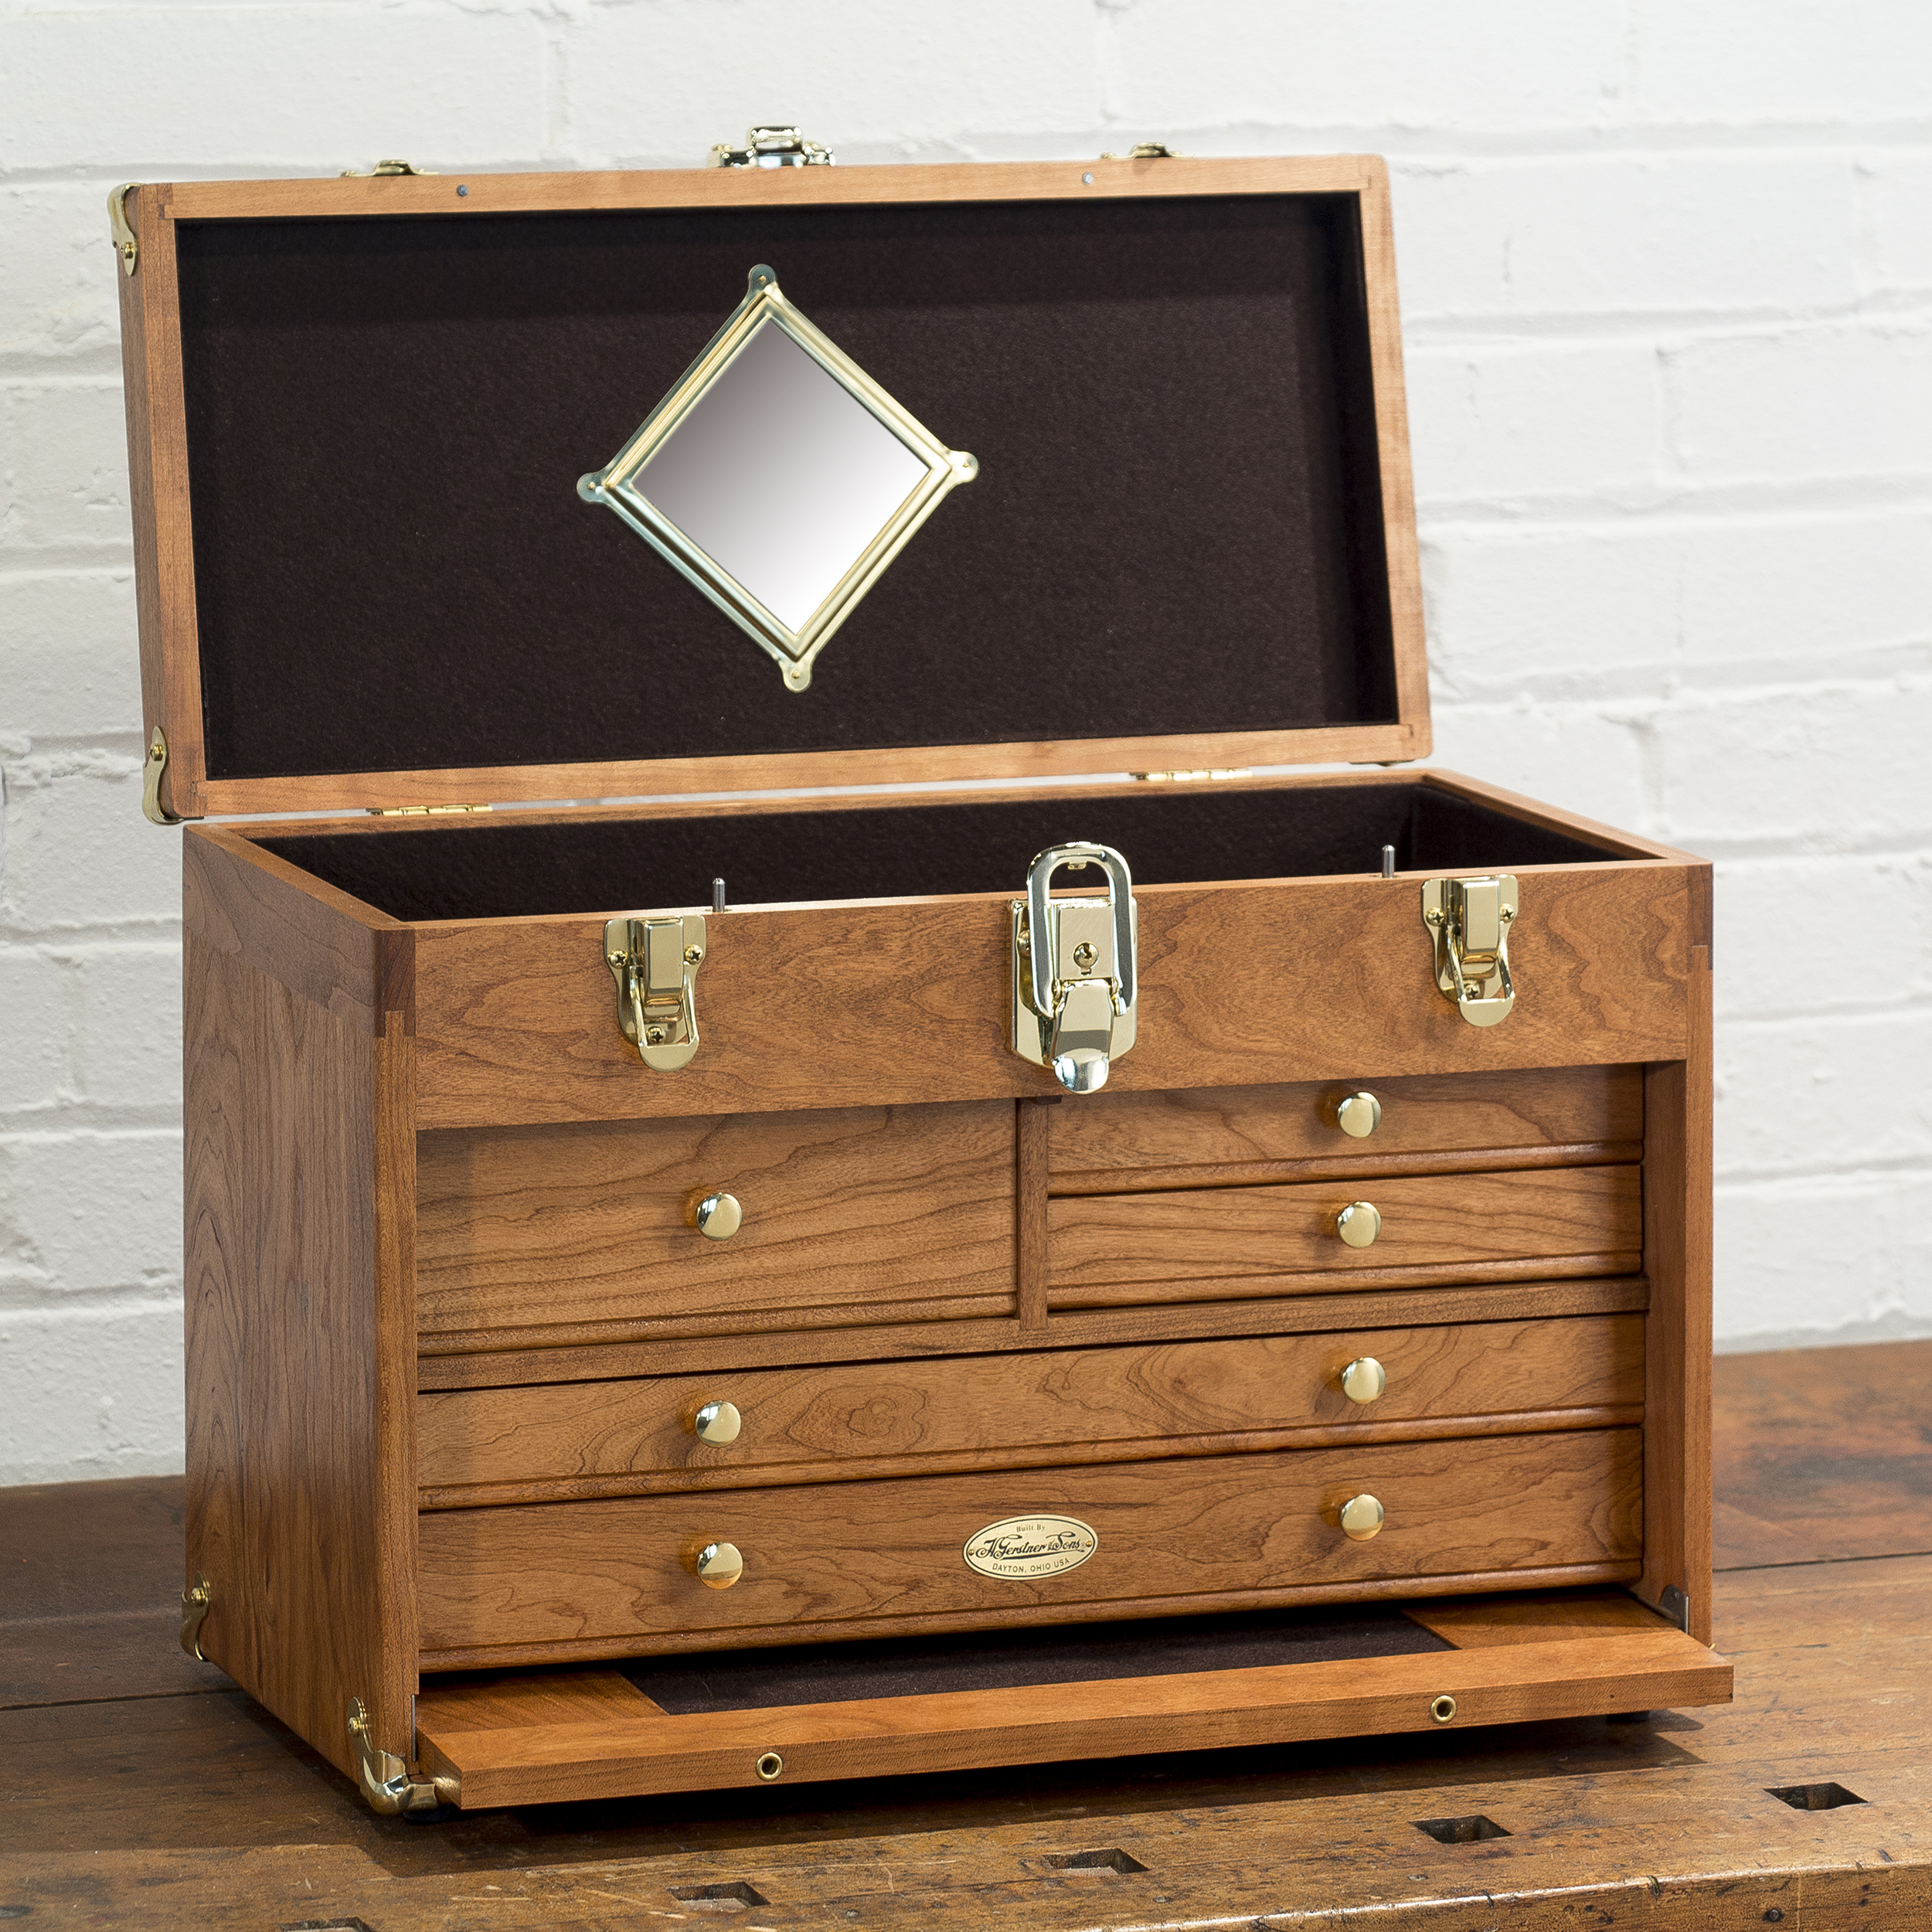 C1805 American Cherry Special Chest